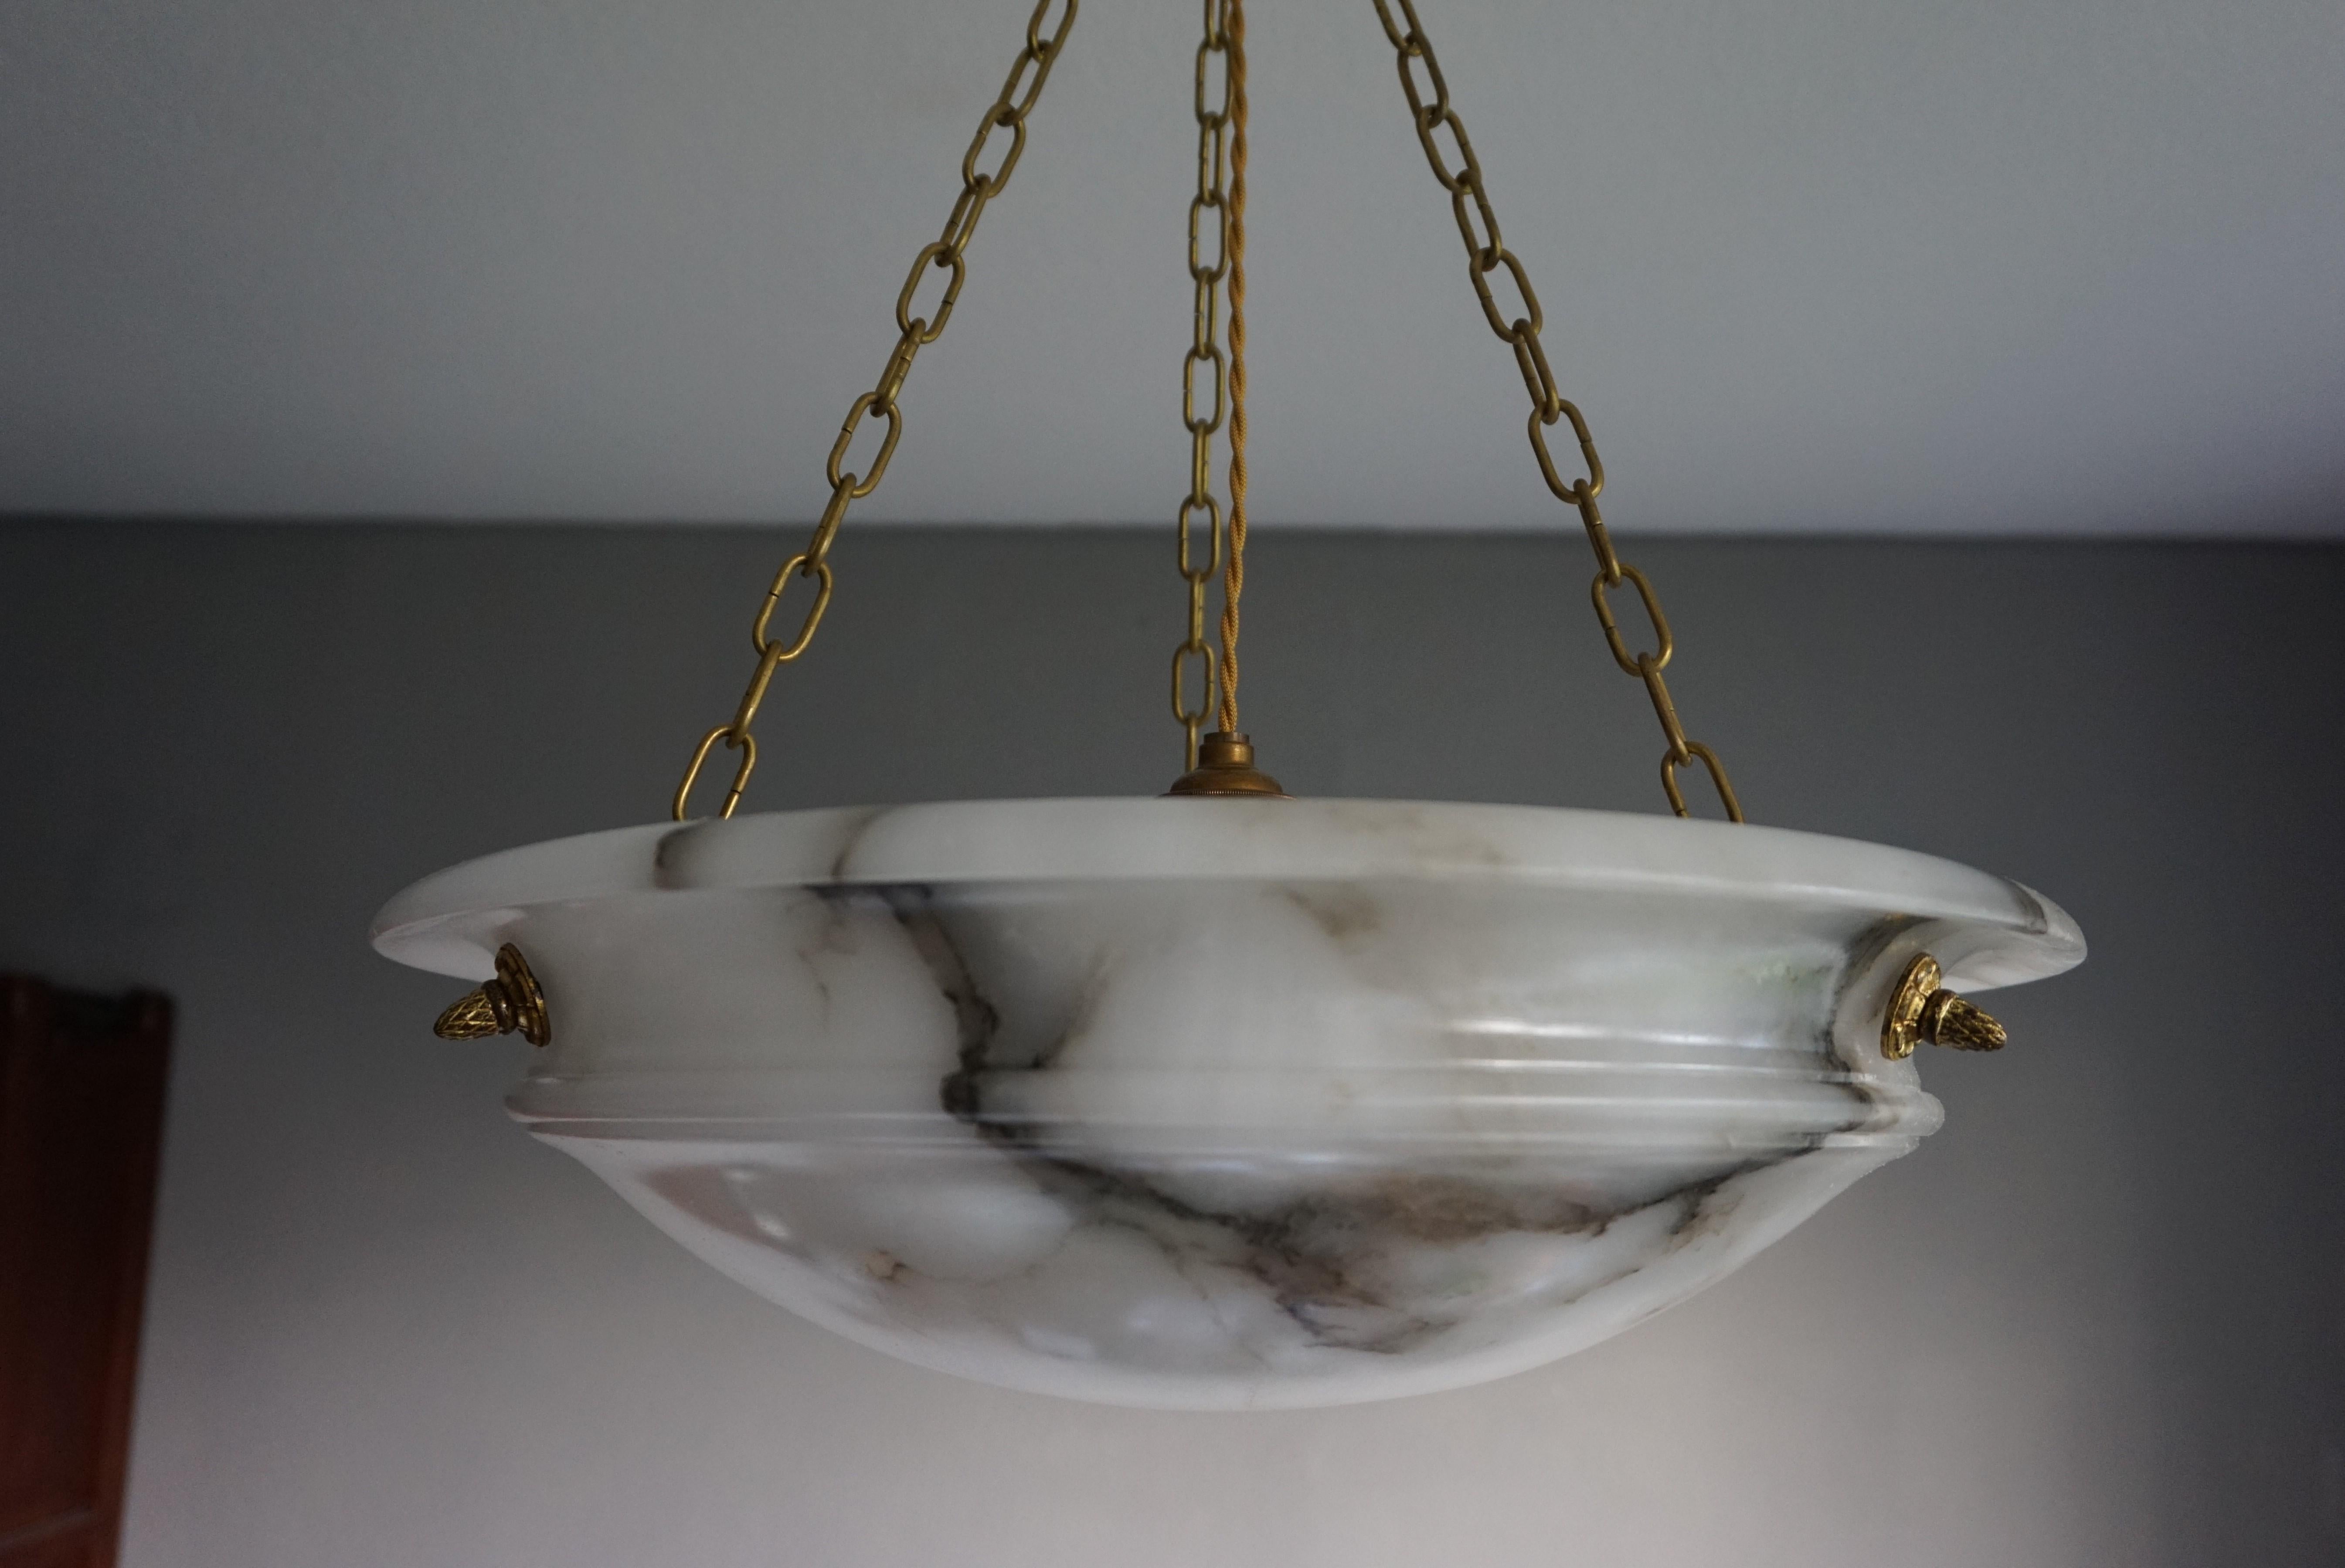 French Art Deco elegance for the collectors and enthousiasts.

If you are looking for a good size, beautiful, timeless and ready to use alabaster chandelier then this striking French specimen from circa 1920 could be gracing your home soon. The